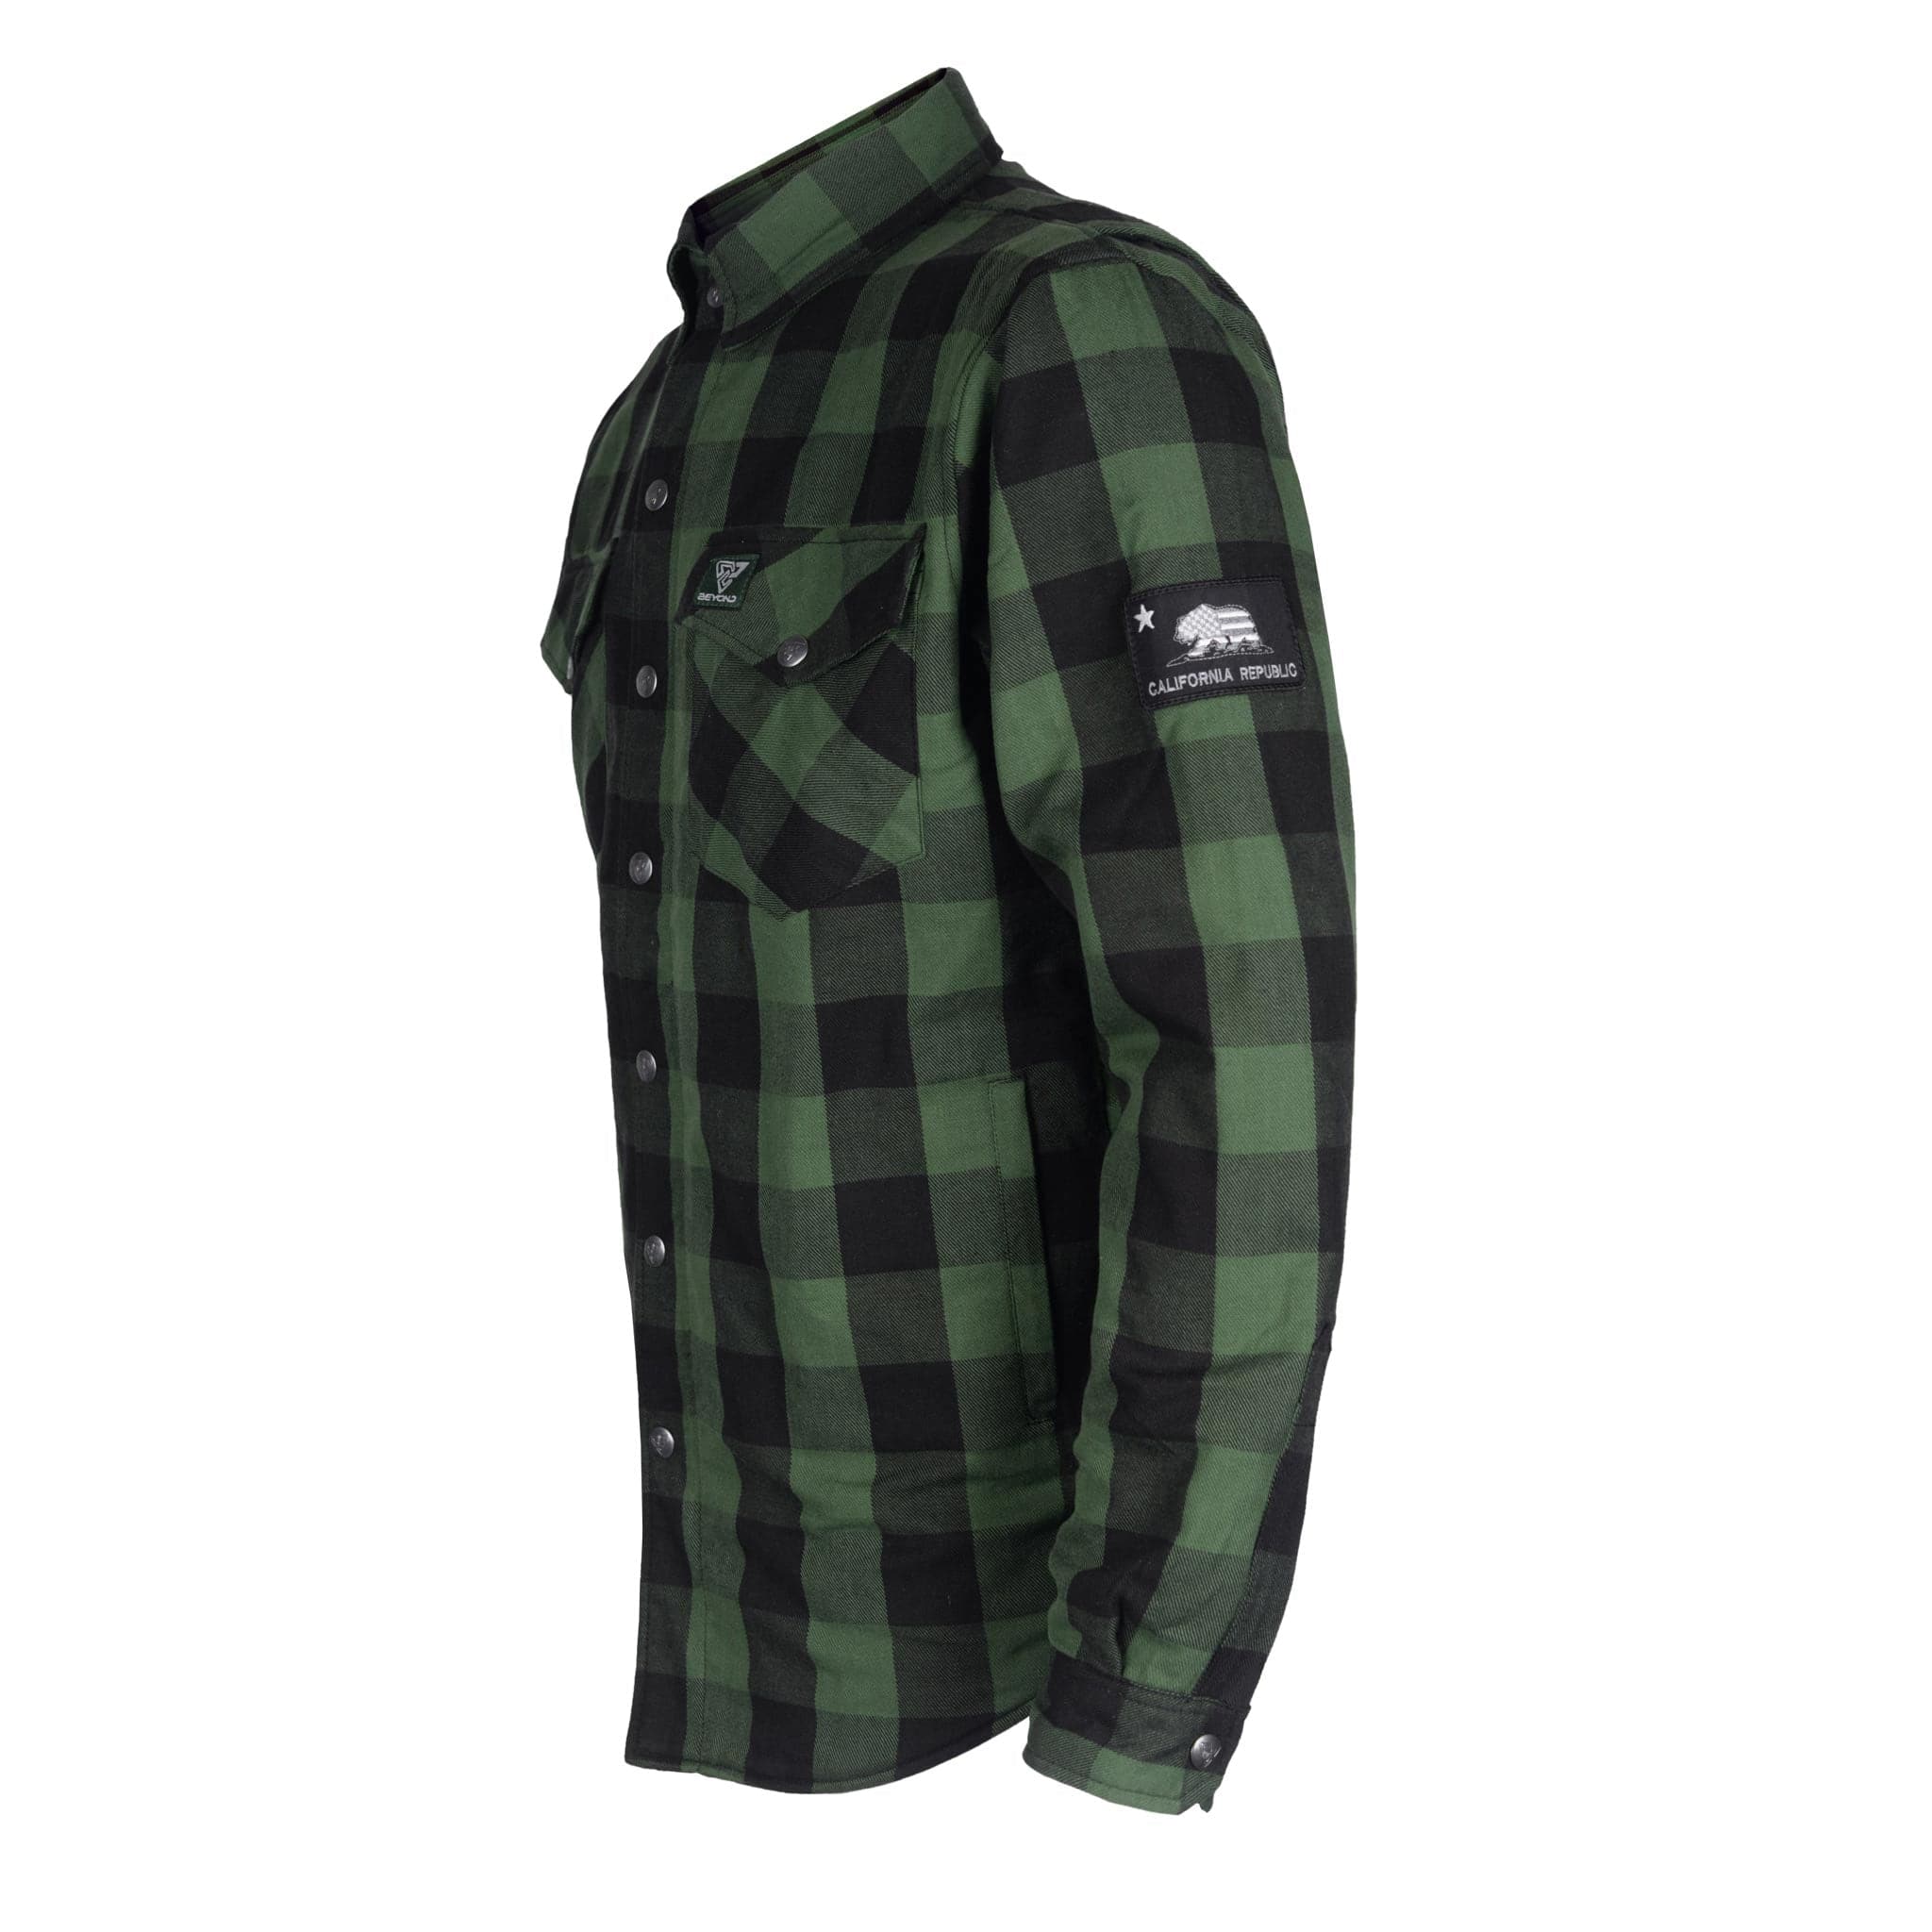 Protective Flannel Shirt "Forest Fury" - Green and Black